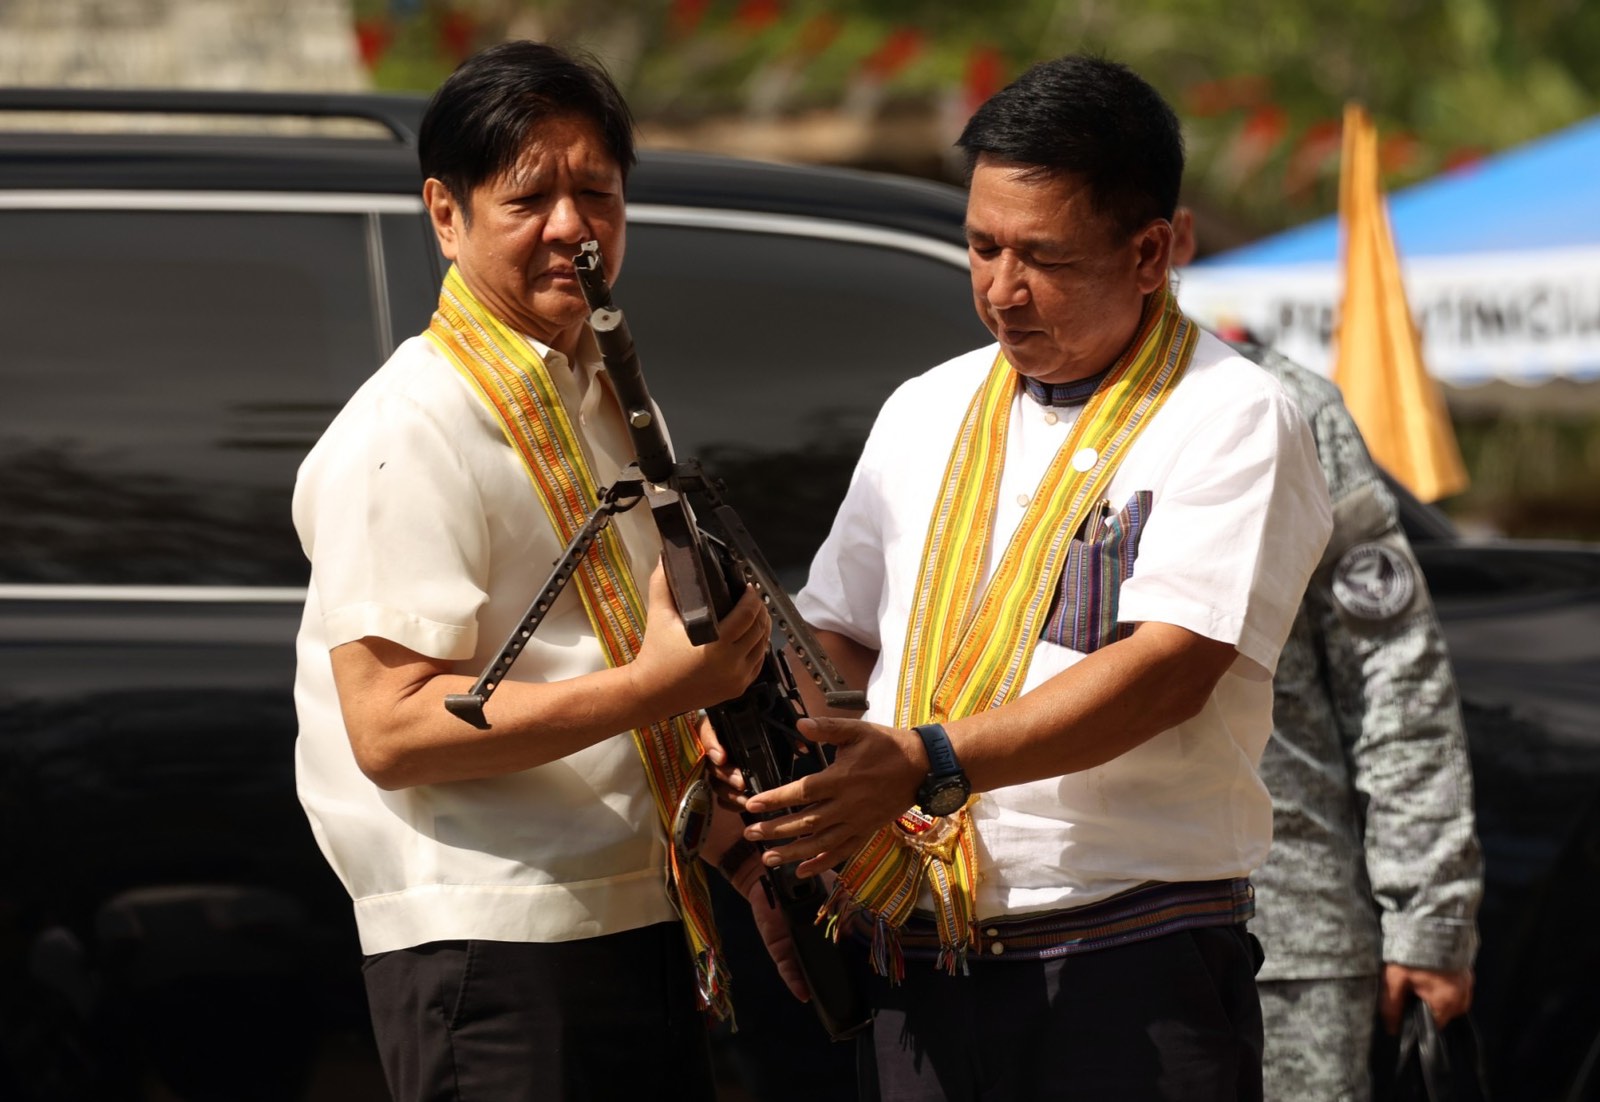 Marcos continues to urge rebels to surrender